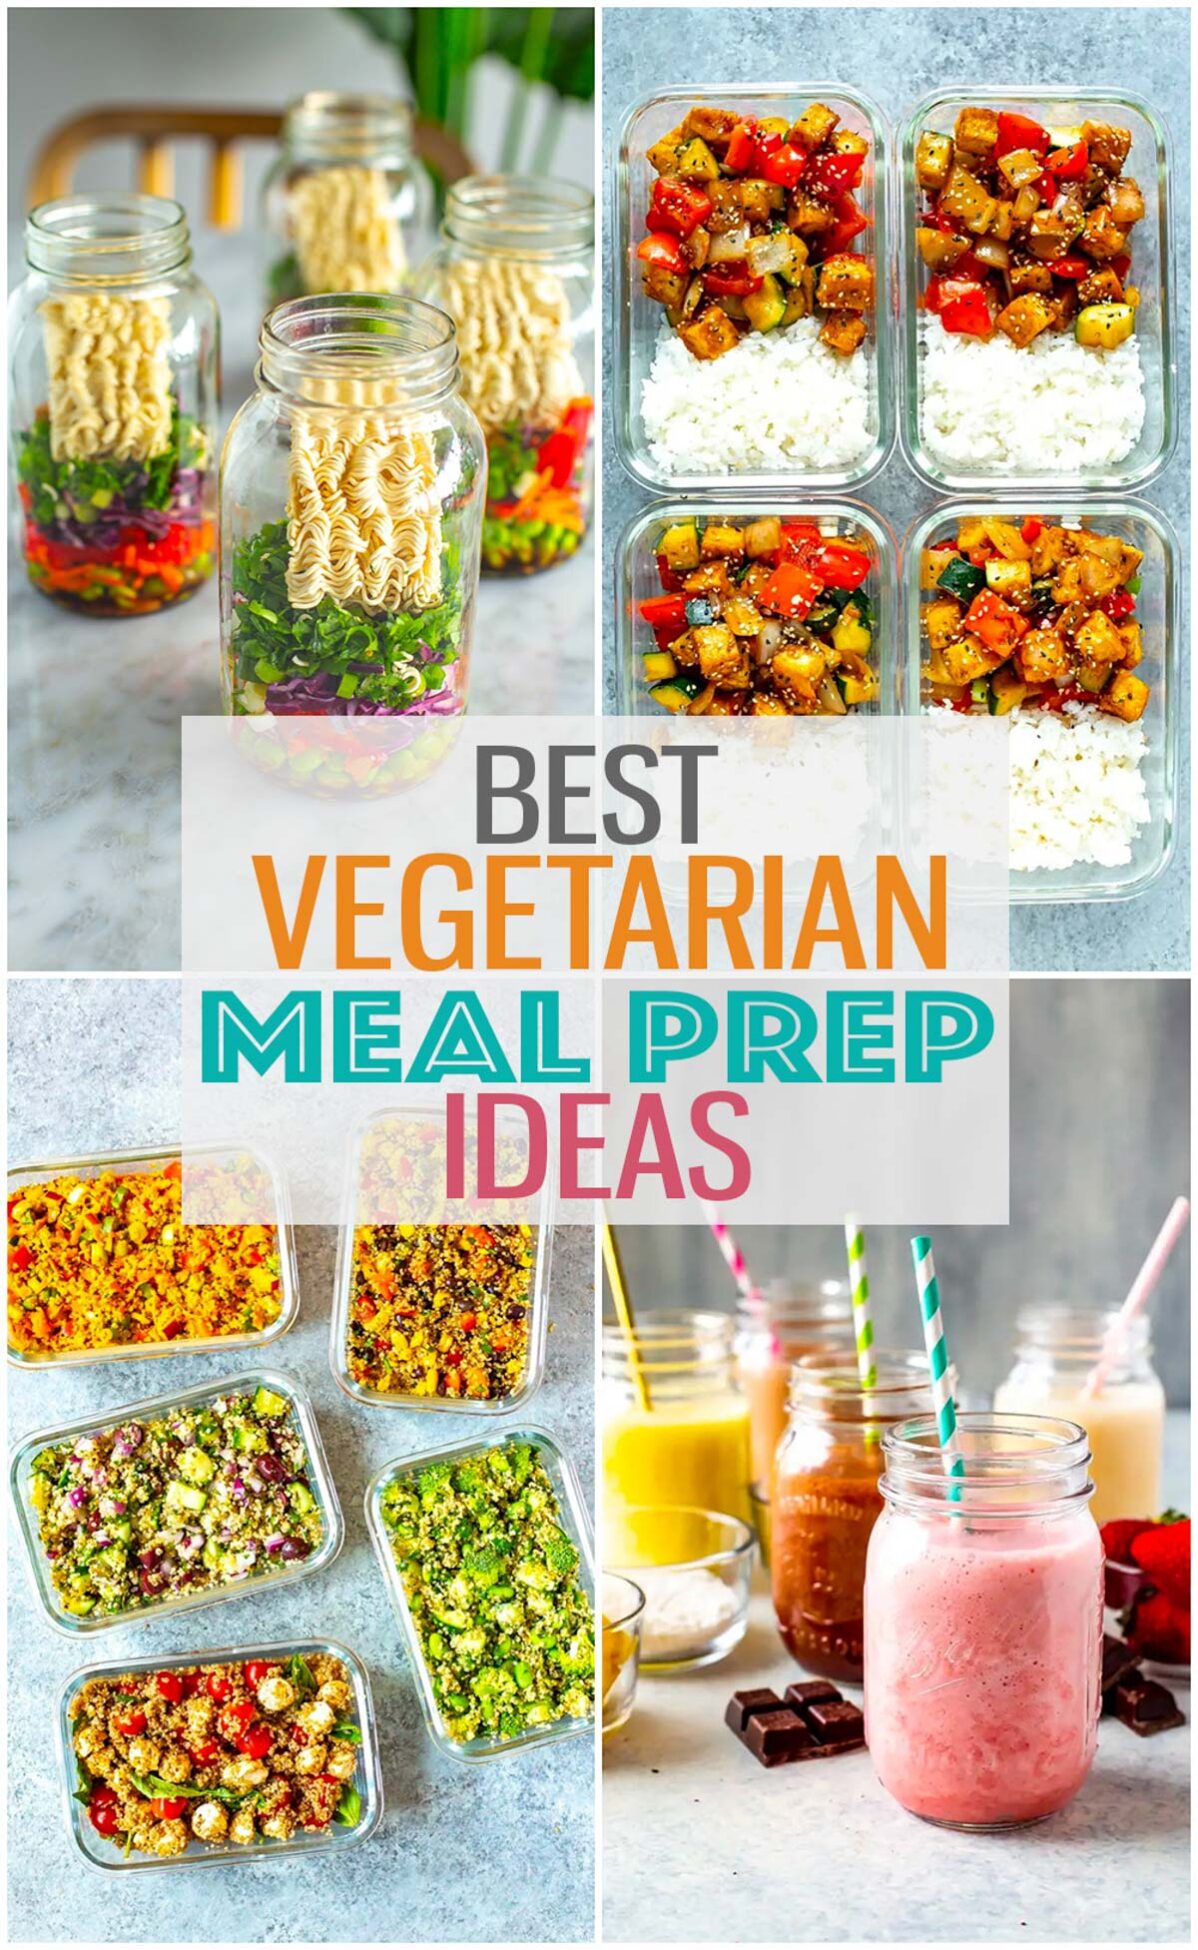 A collage of four different meals with the text "Best Vegetarian Meal Prep Ideas" layered over top.